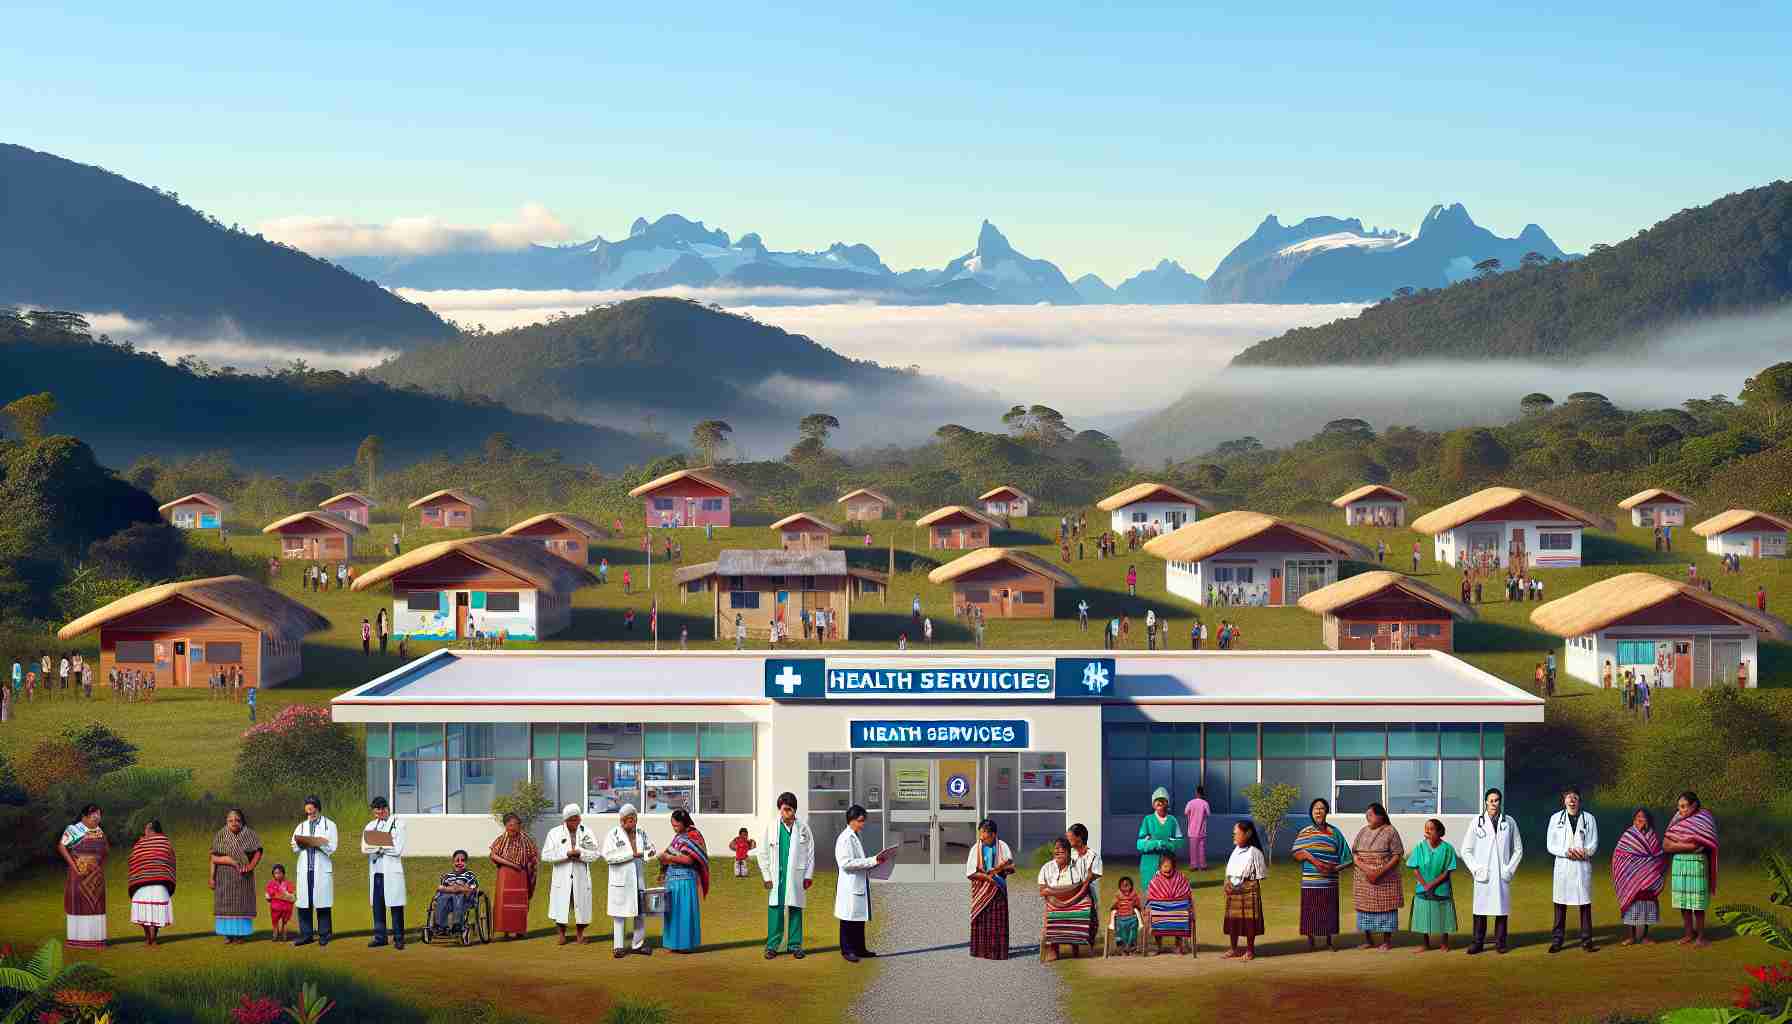 Generate an image illustrating the concept of expanding health services for Indigenous communities. It should be a high-resolution, realistic picture. An example could include a well-equipped hospital under a clear sky located in a rural area amid the pristine nature. The facility might have a sign reading 'Health Services' in different Indigenous languages, and Indigenous healthcare professionals of diverse genders and descents - Middle-Eastern male doctor, Hispanic female nurse, Black male paramedic, South Asian female dietician, could be shown providing medical services to community members of different ages and genders.